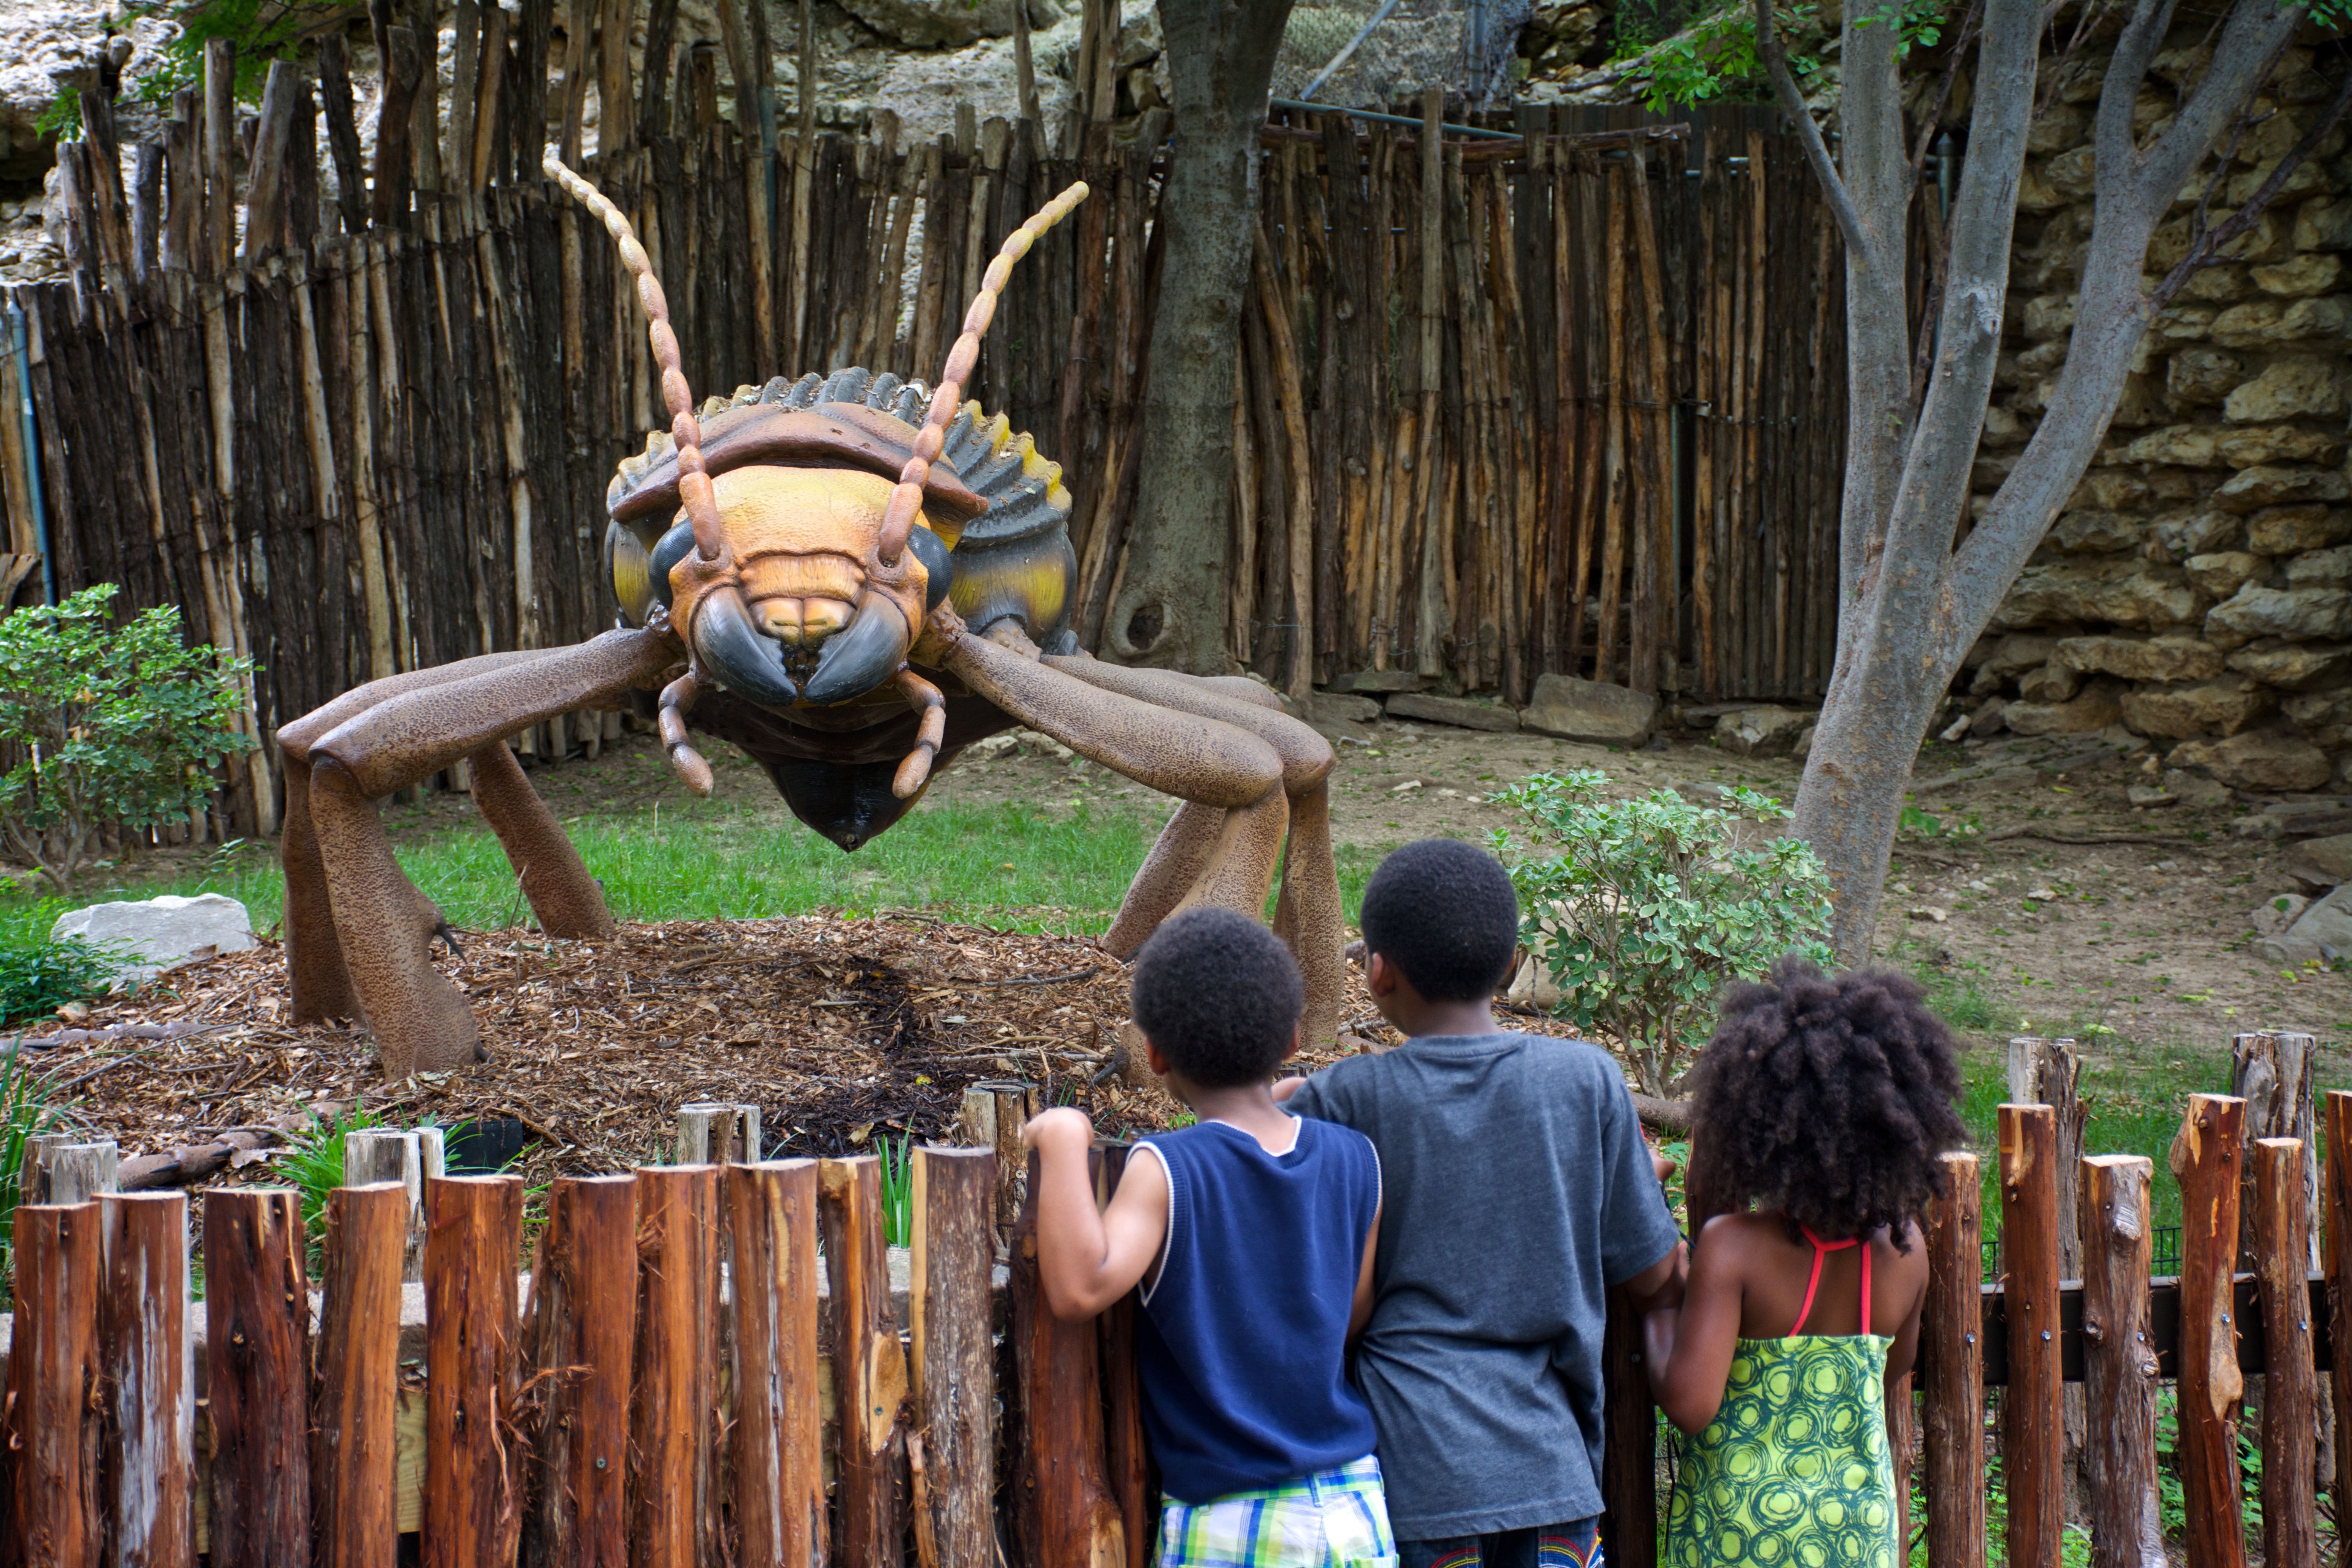 Children looking at giant bombardier beetle